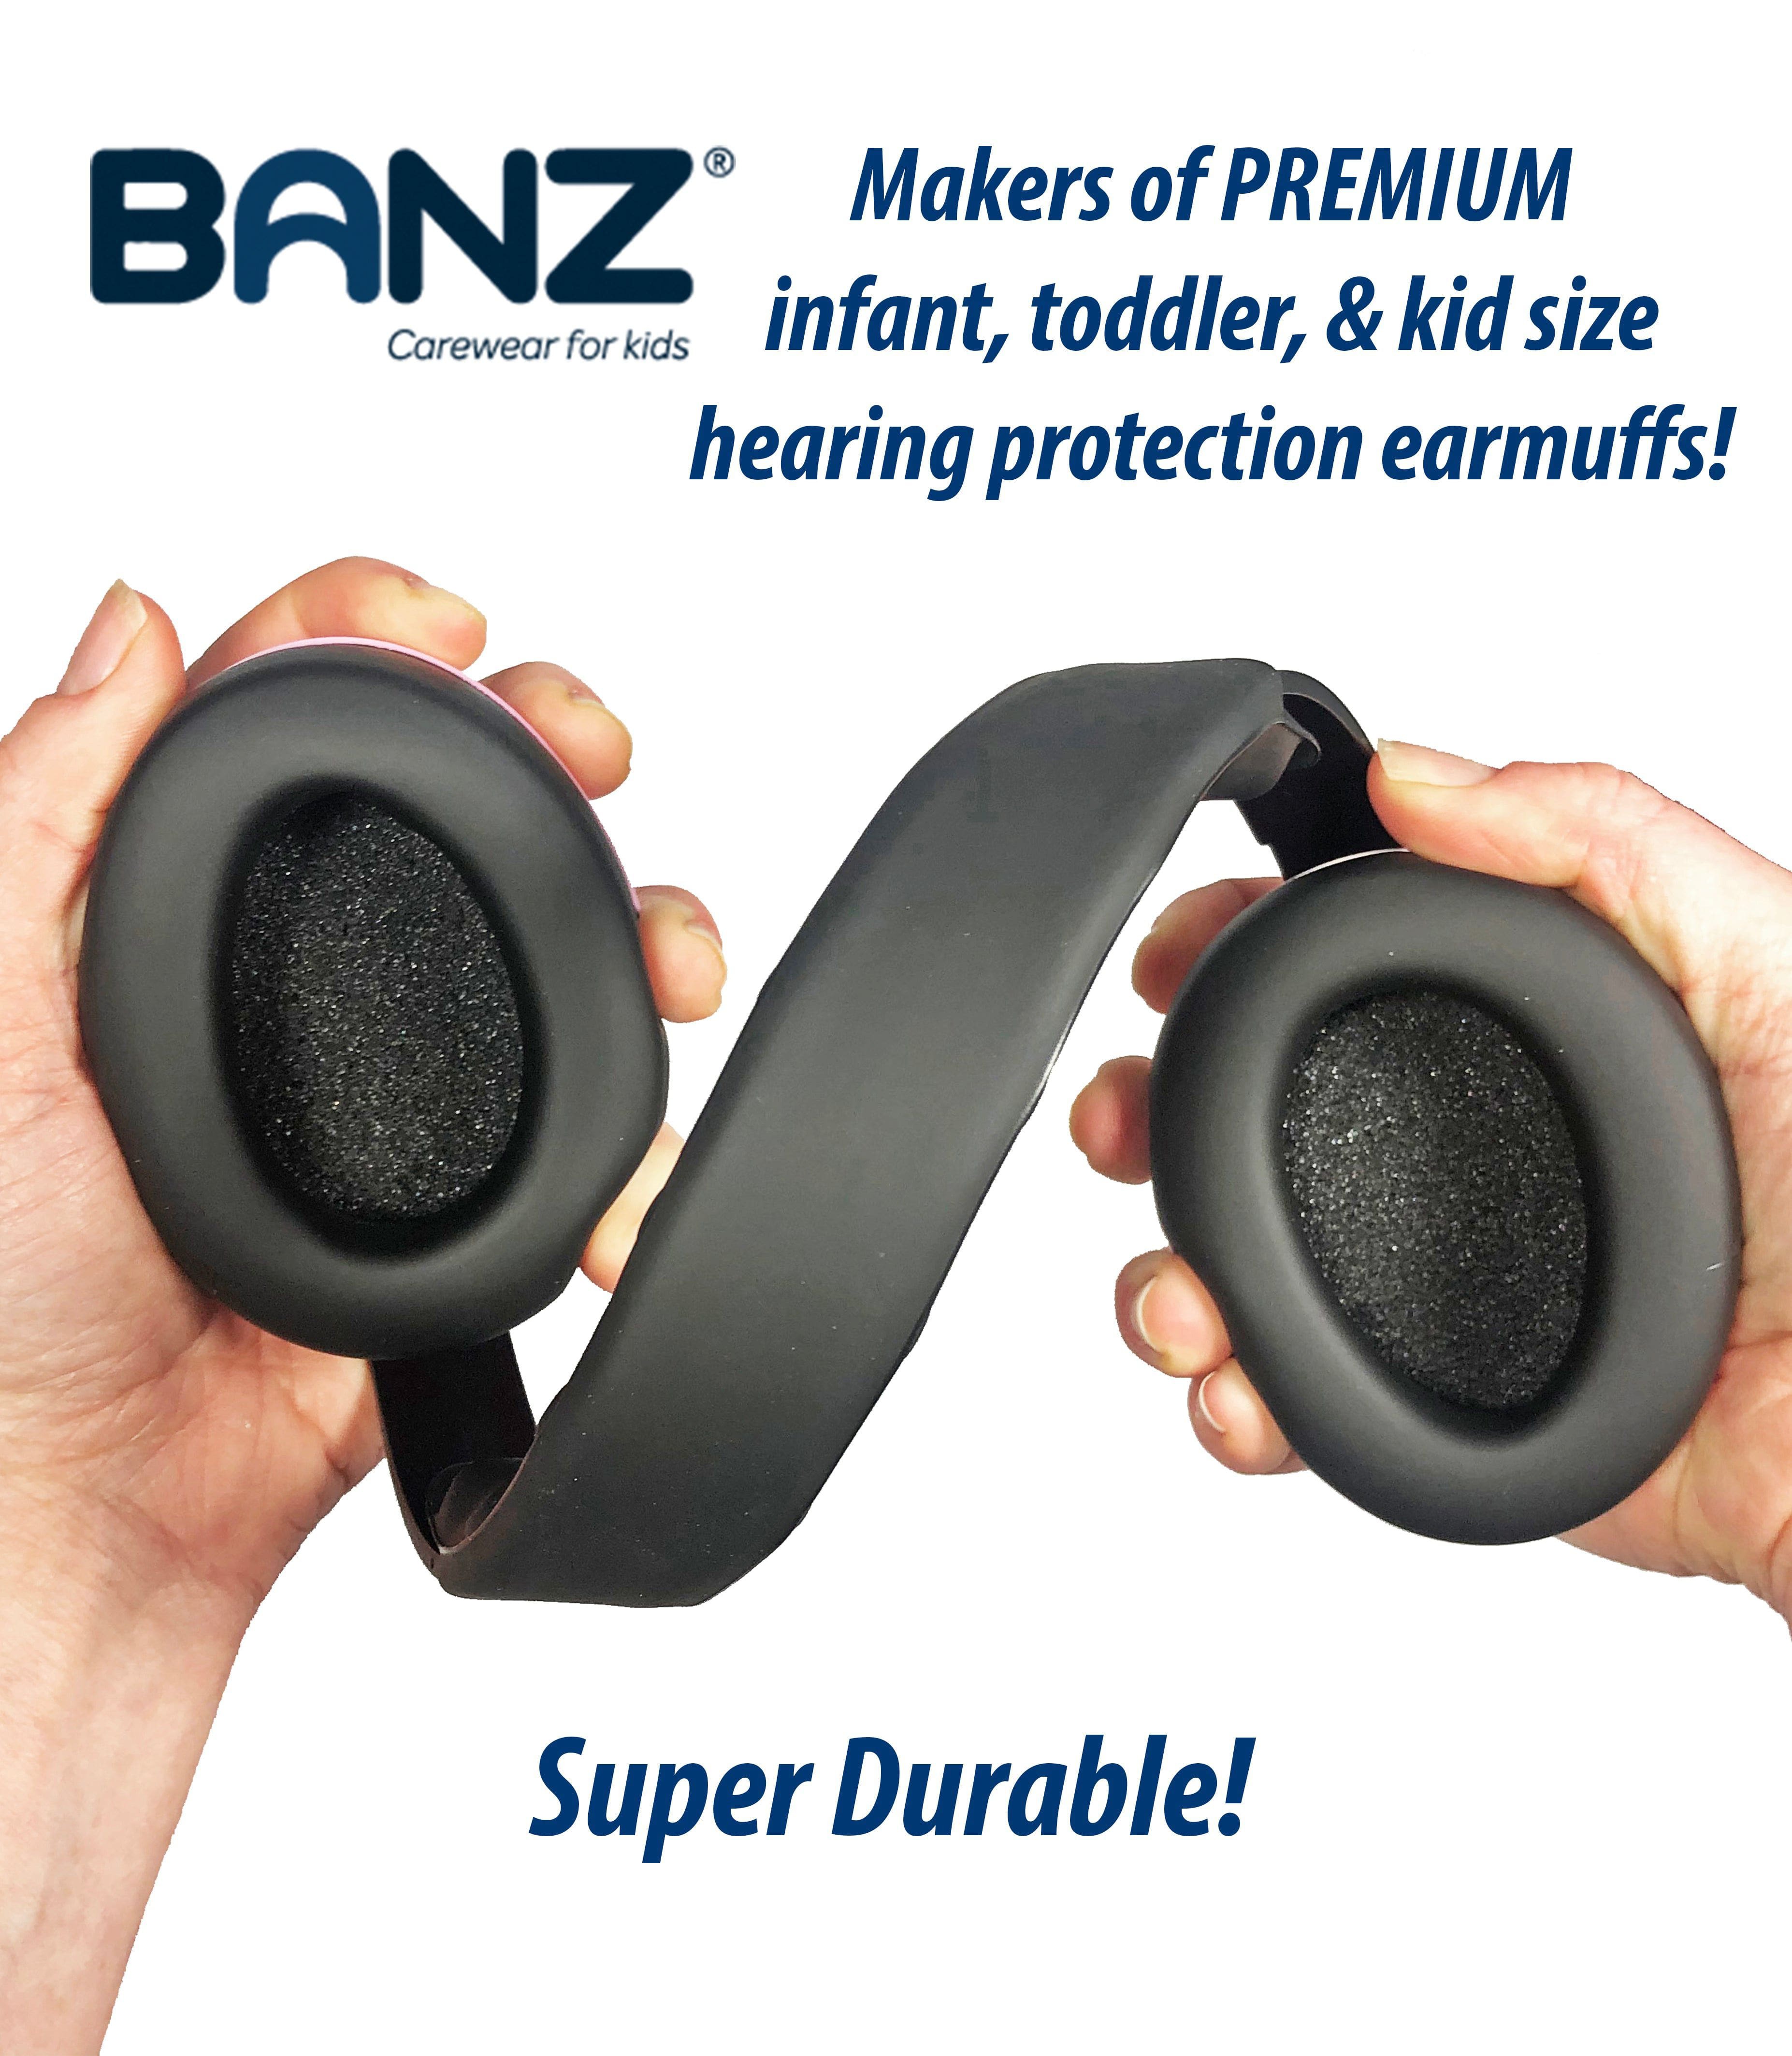 Baby Banz Infant Hearing Protection Earmuffs - image 4 of 4